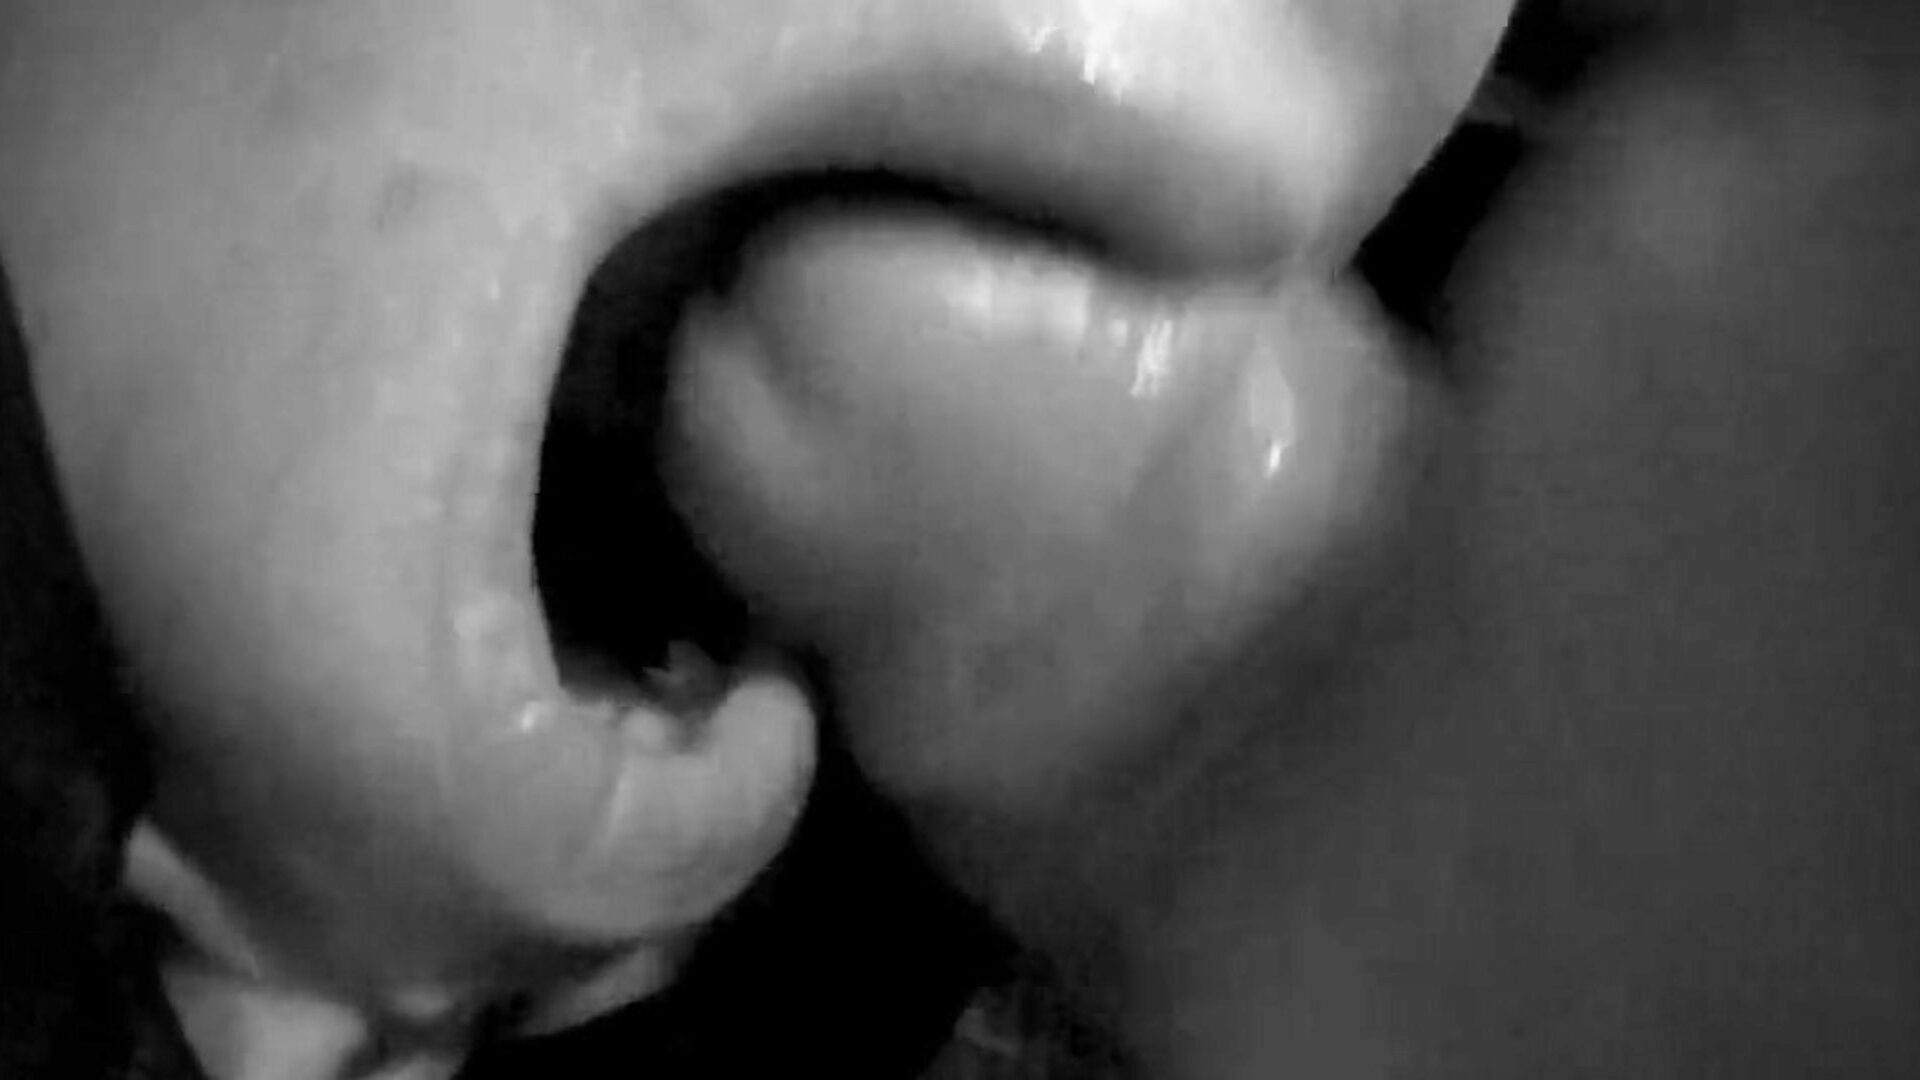 Mouth bang and spunk in throat of wife wench large bap engulfing facial Mouthfuck and jizm in throat of wife doxy large funbag engulf facial cumshot hard comments